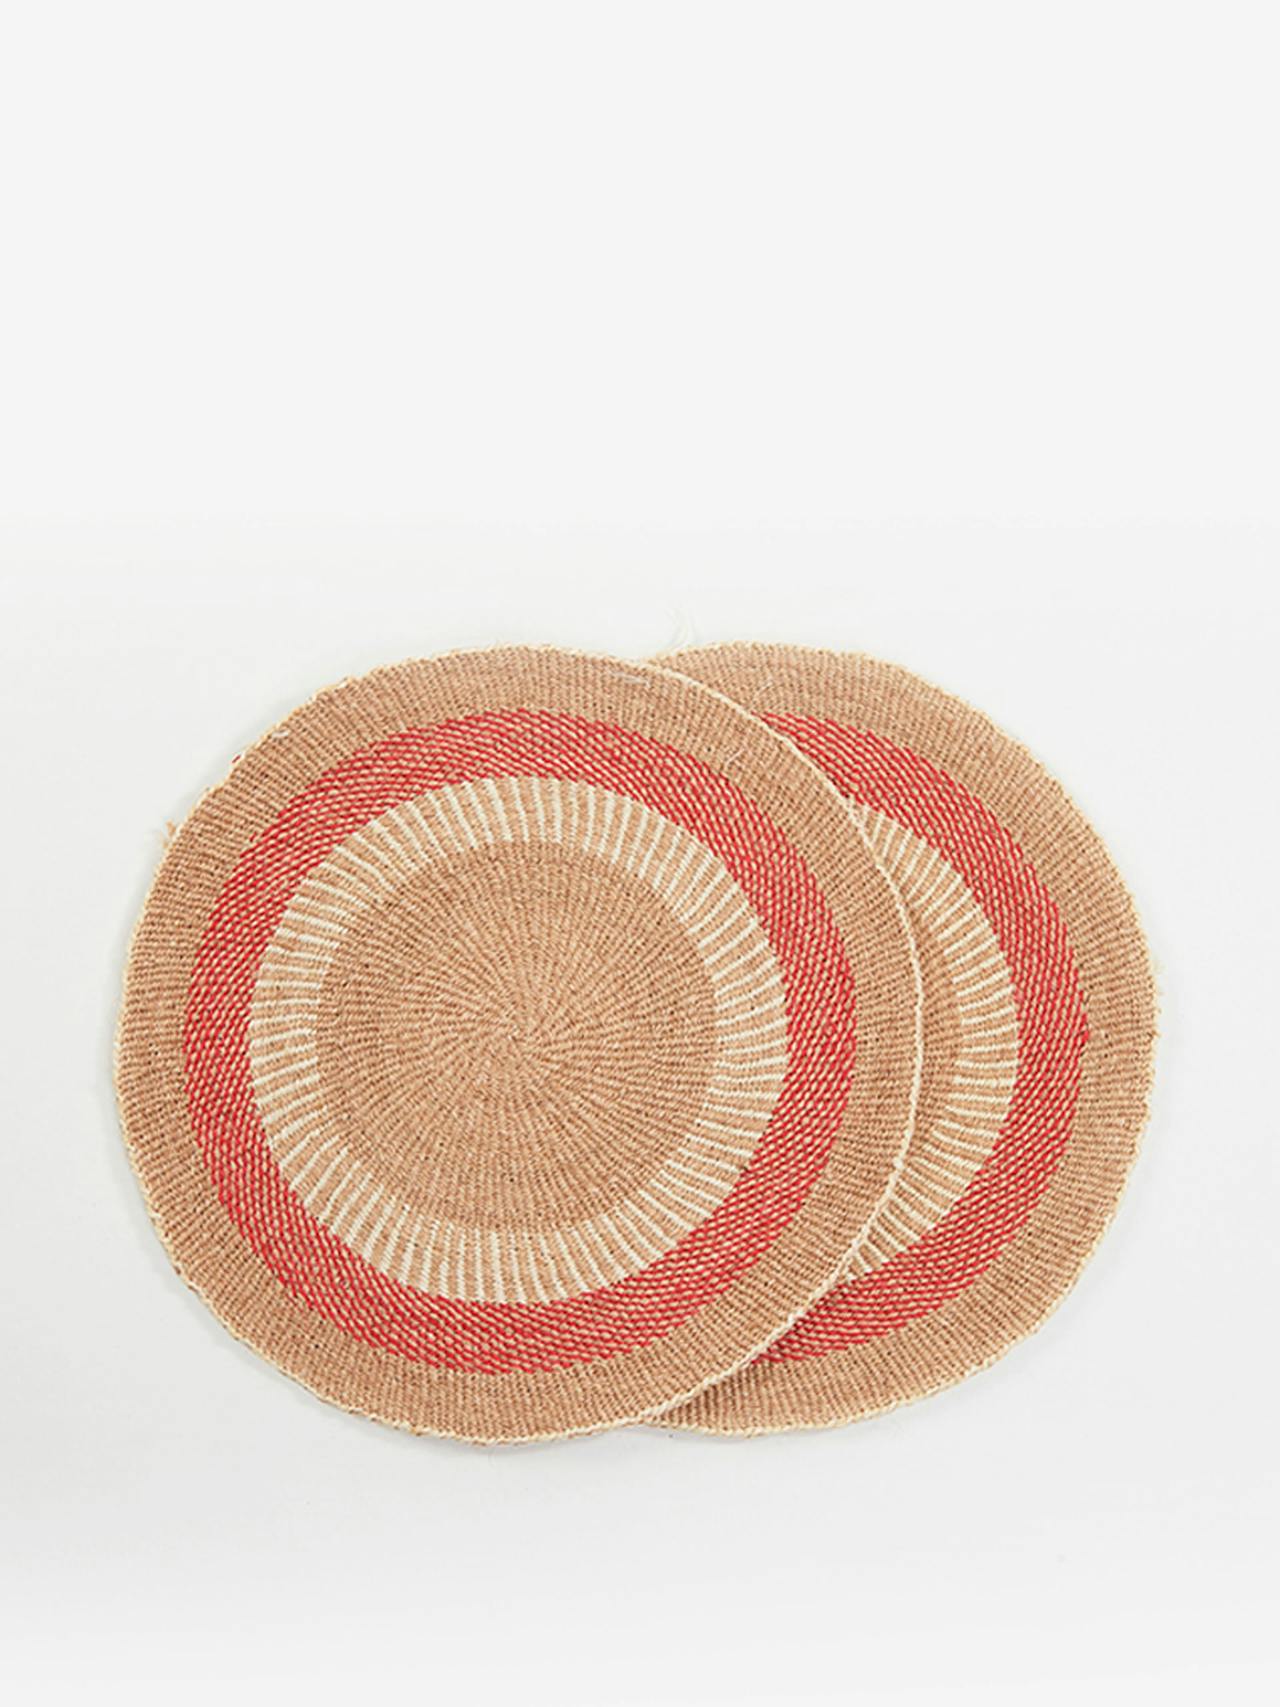 Sunset placemats, set of 2